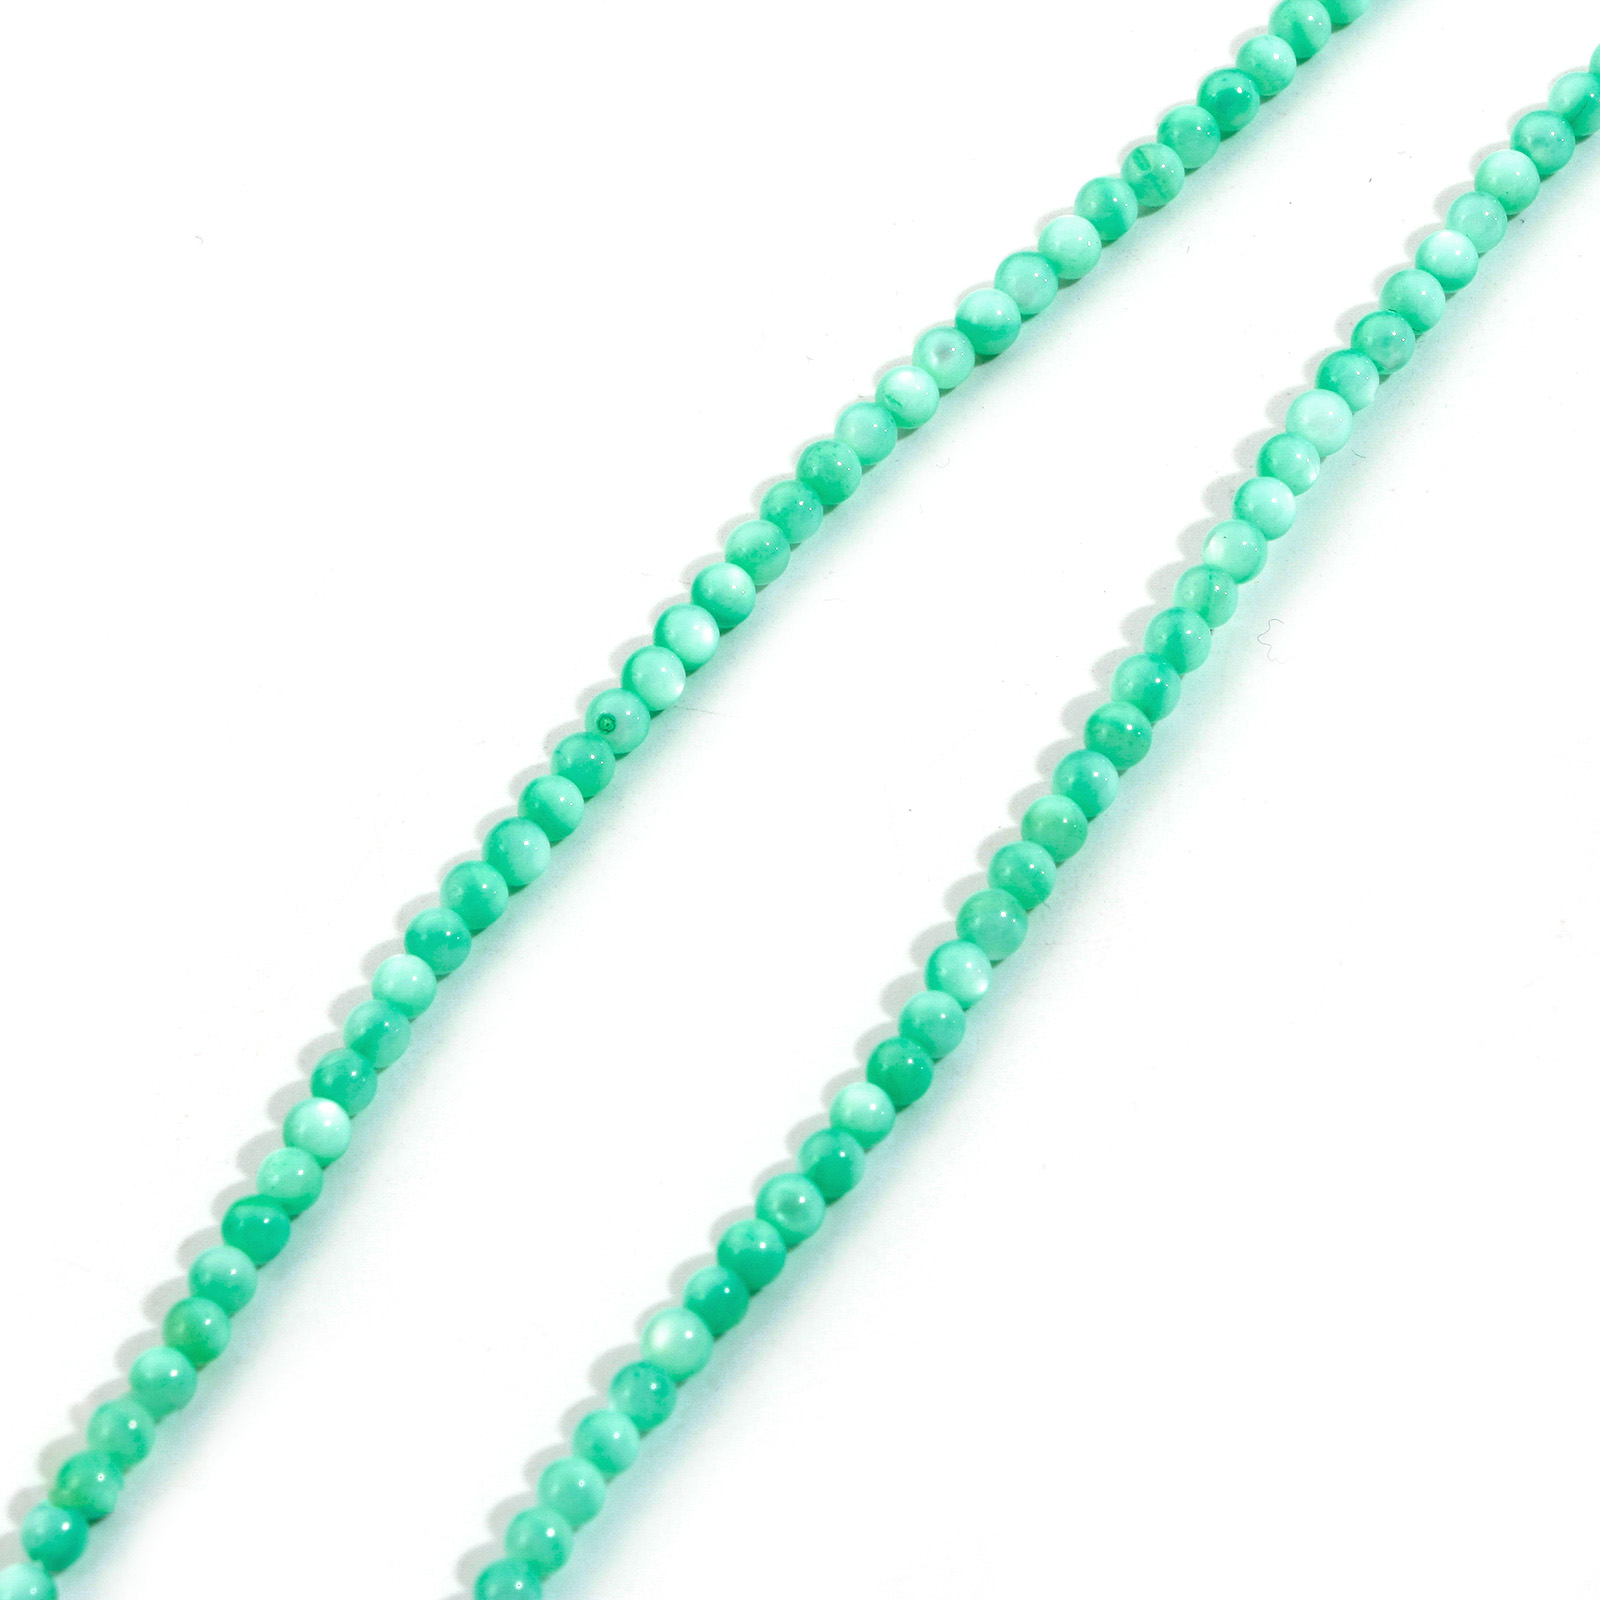 Picture of Natural Dyed Shell Loose Beads For DIY Charm Jewelry Making Round Light Green About 3mm Dia, Hole:Approx 0.4mm, 38cm(15") long, 1 Strand (Approx 132 PCs/Strand)